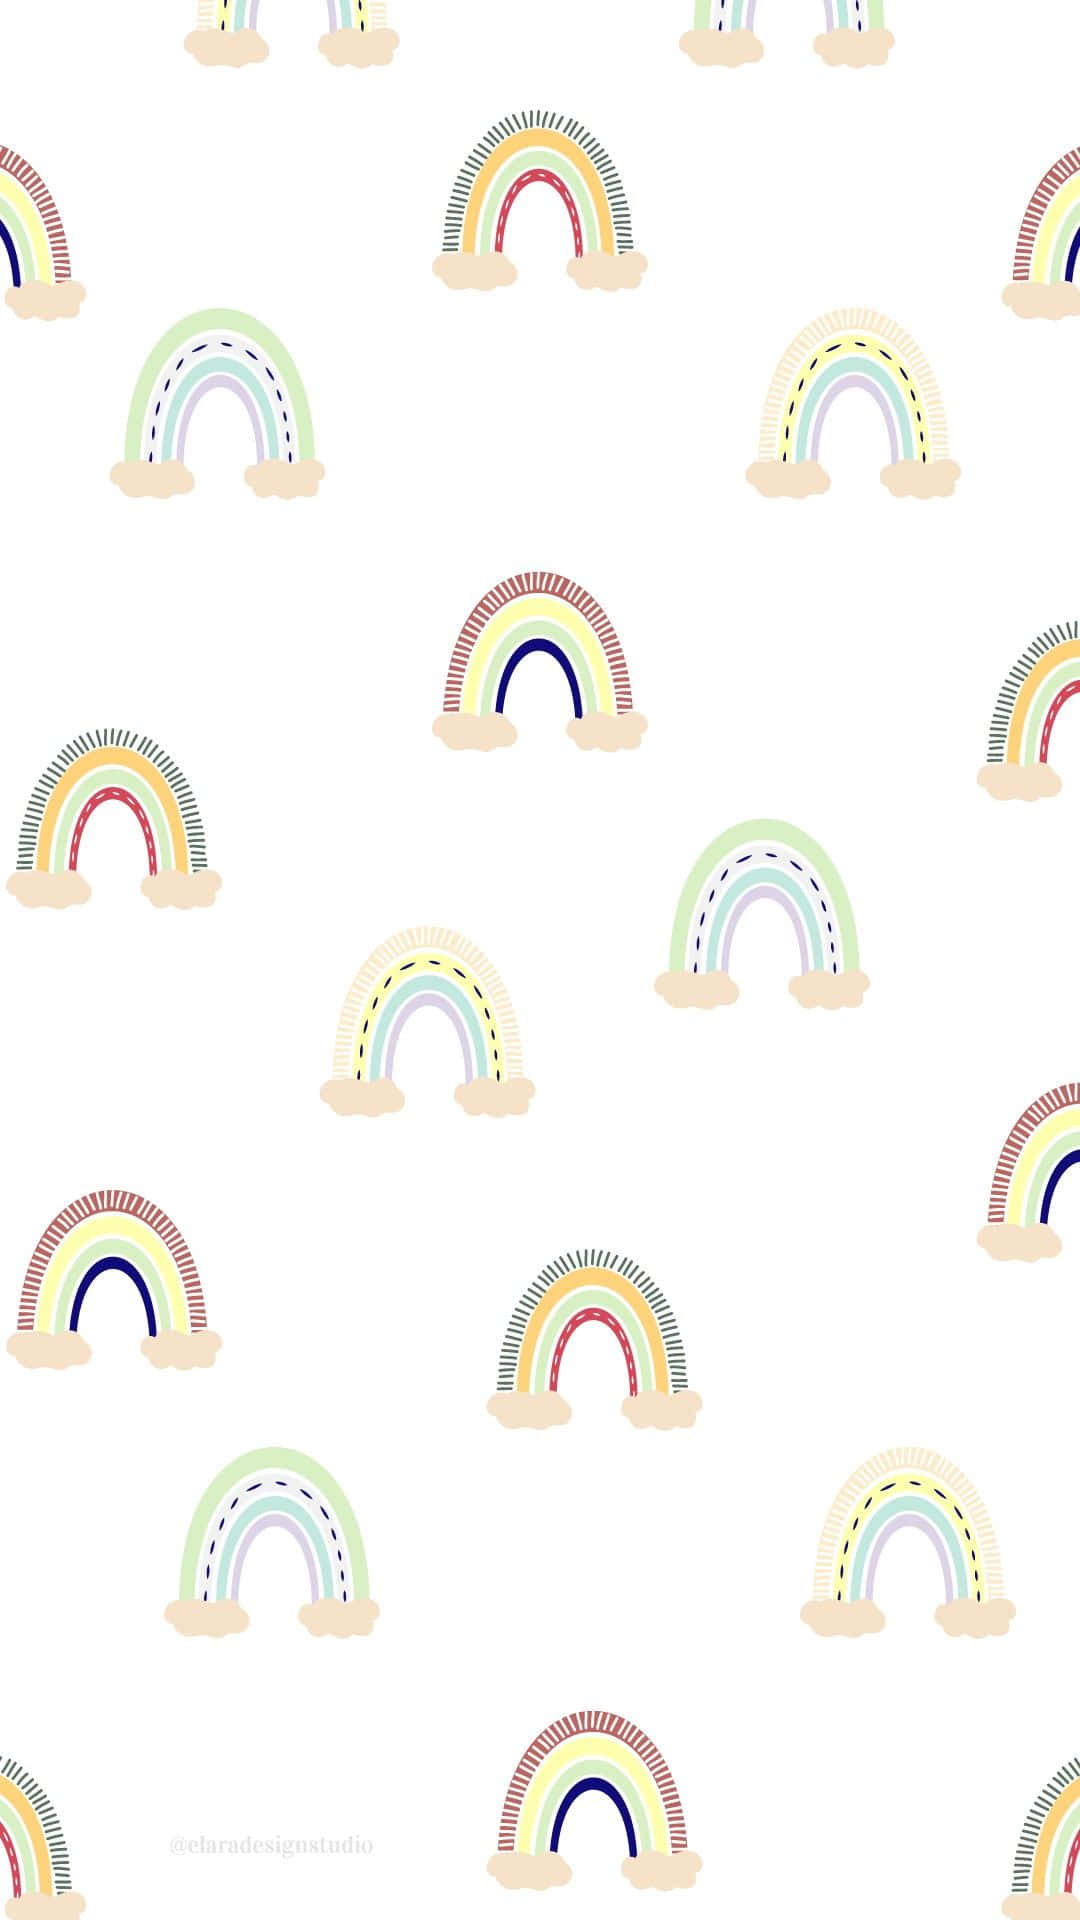 A Pastel Rainbow of Color on an iPhone Wallpaper